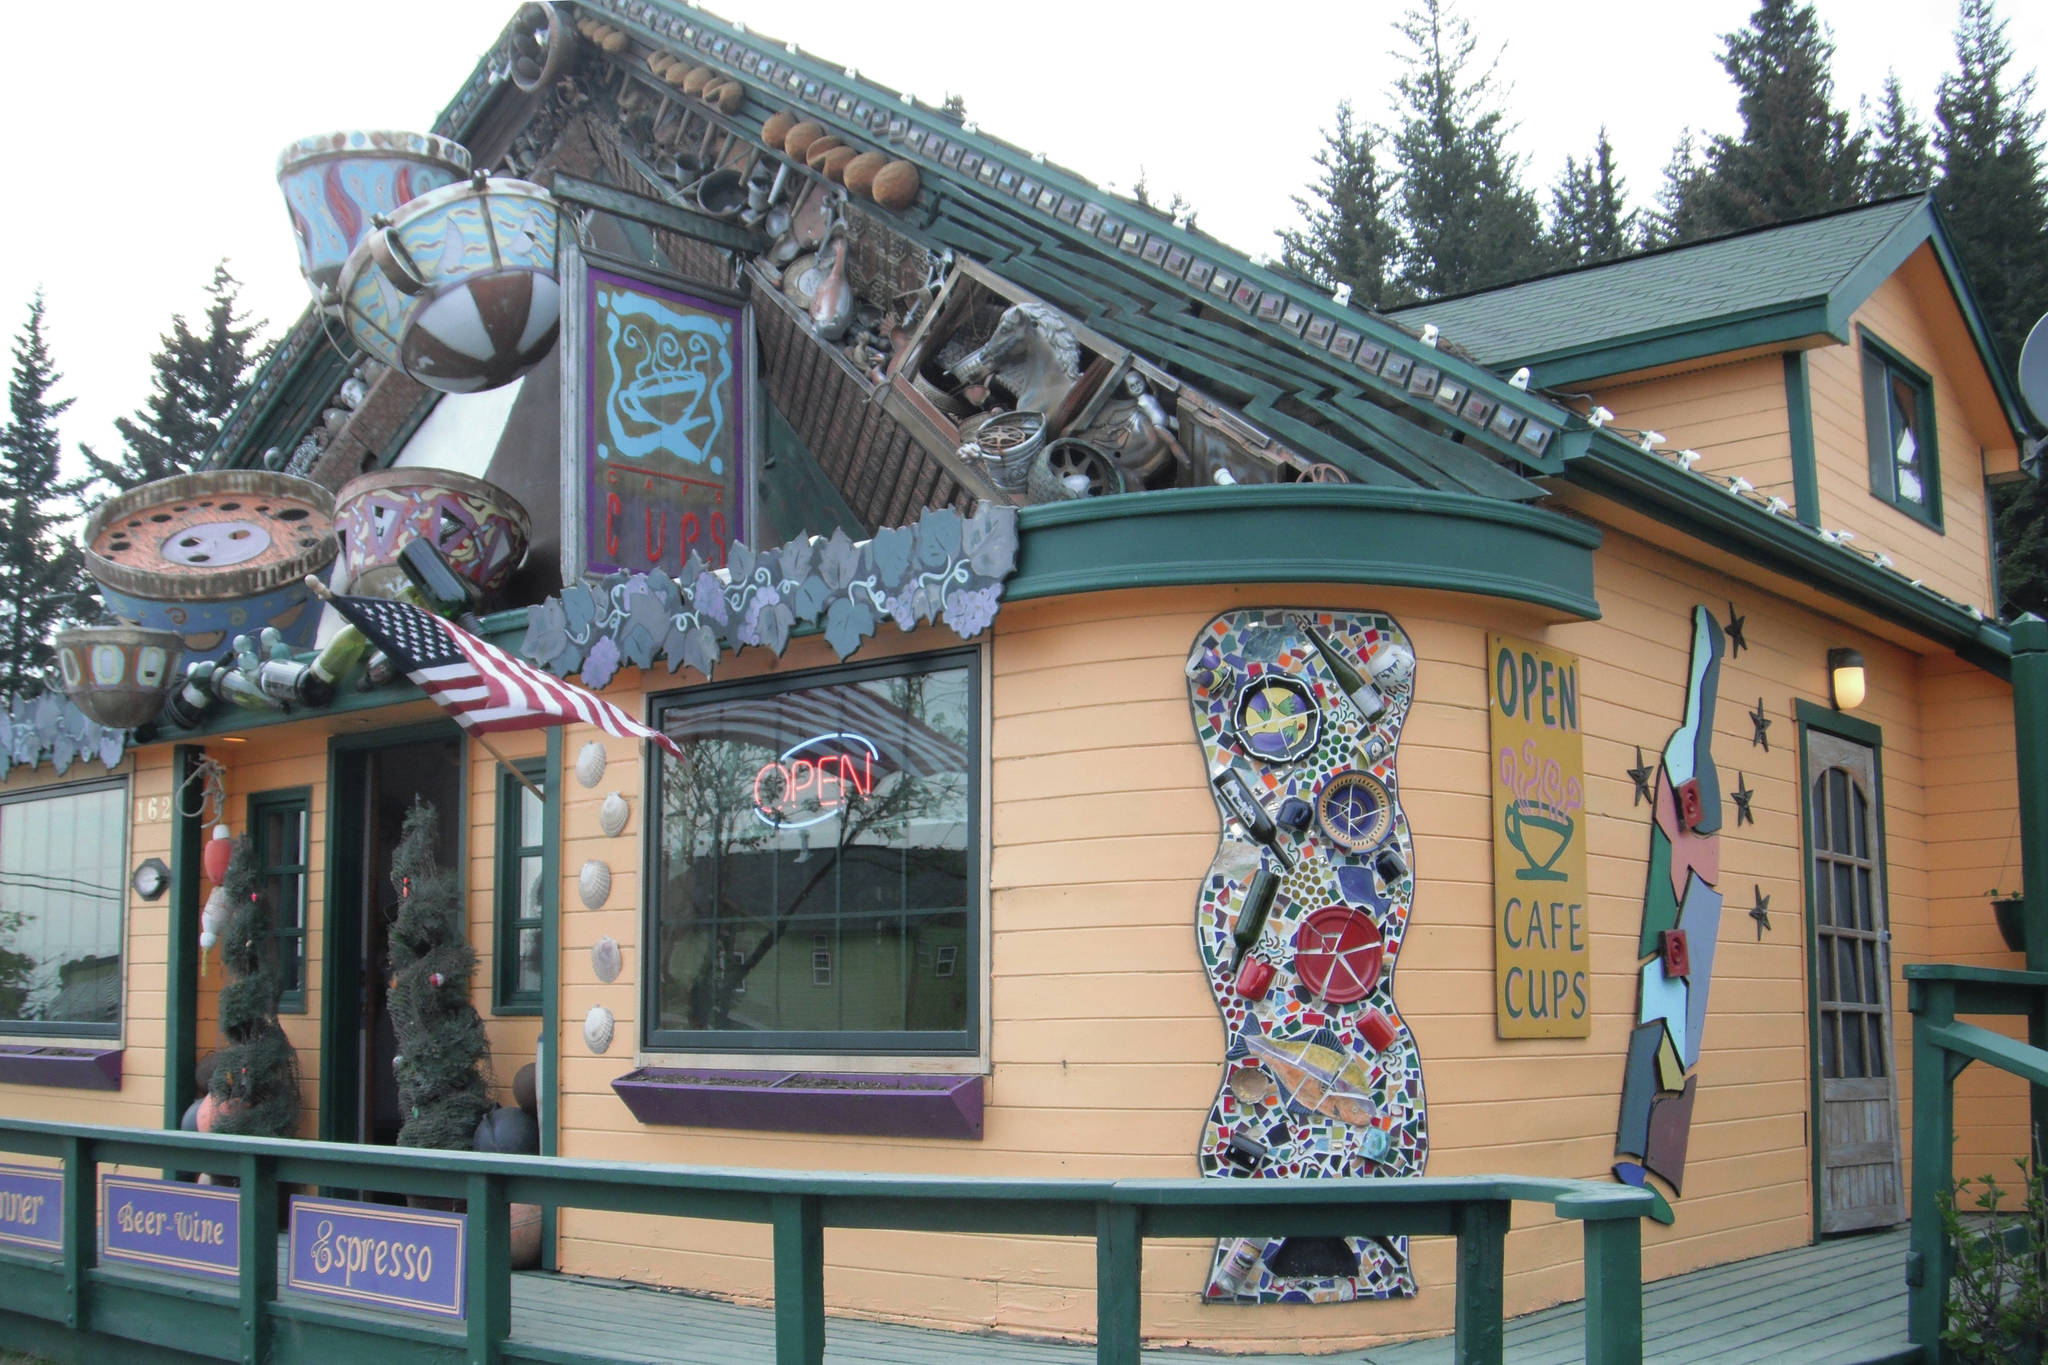 The iconic facade of Cafe Cups, as seen in a May 2014 photo taken in Homer, Alaska. (Photo provided)